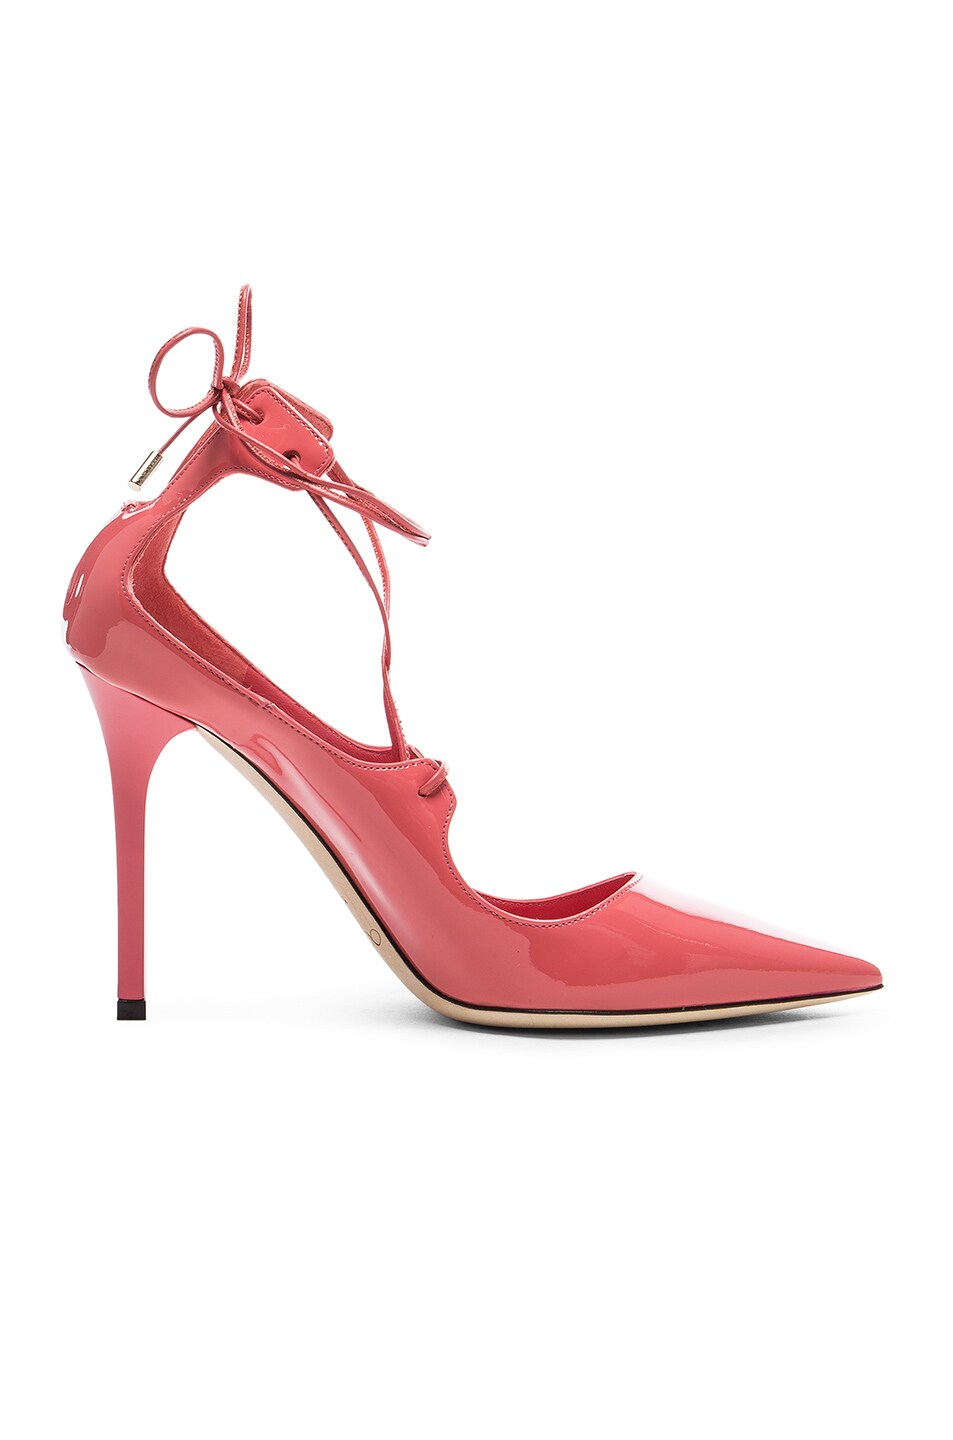 Image 1 of Jimmy Choo Patent Leather Vita Pumps in Coral Pink